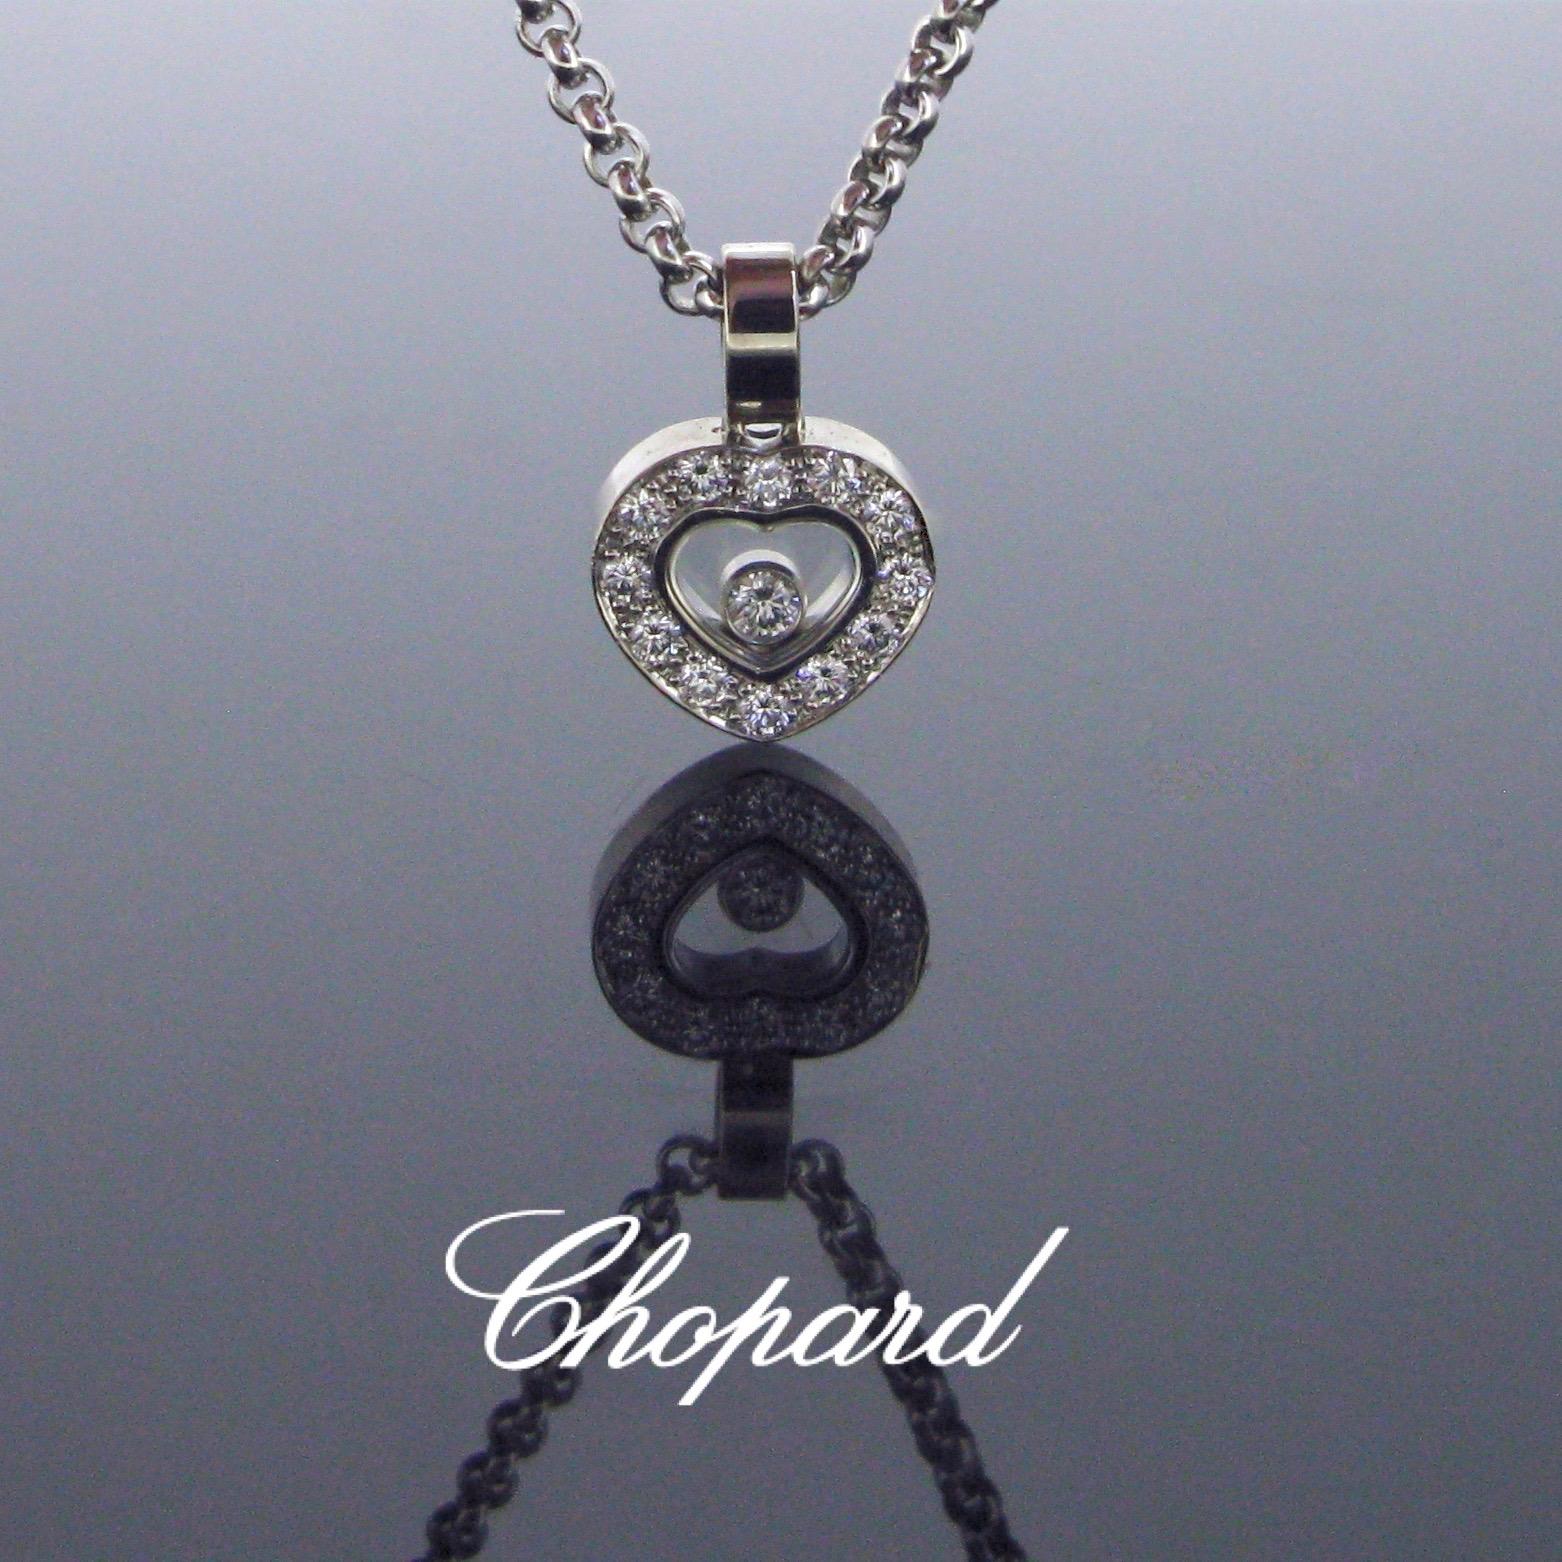 This pendant necklace is an instant classic of Chopard collection. The pendant has a heart shape design and it contains a floating diamond. The heart is adorned with 12 brilliant cut diamonds. The signature Chopard is legible on the glass and also